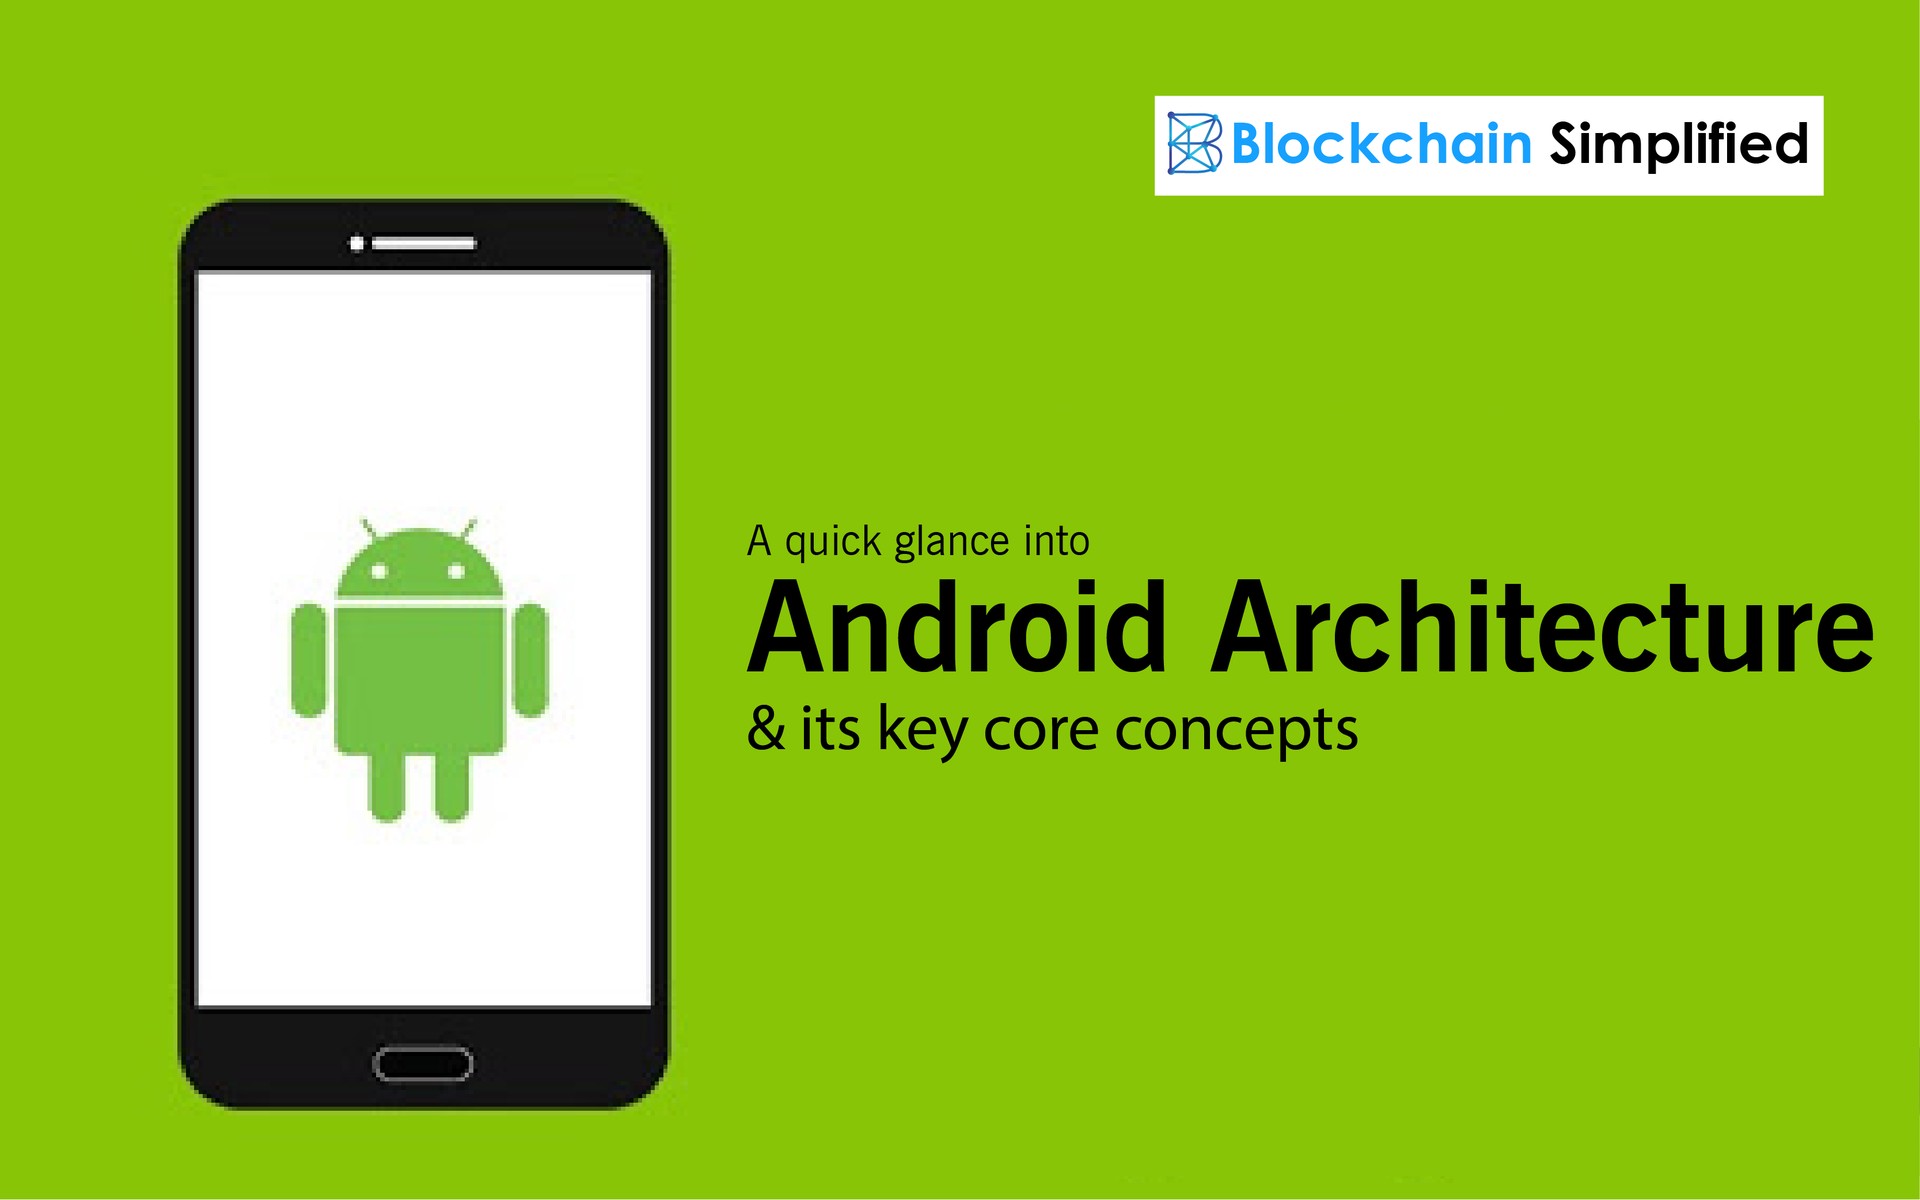 Android Architecture main